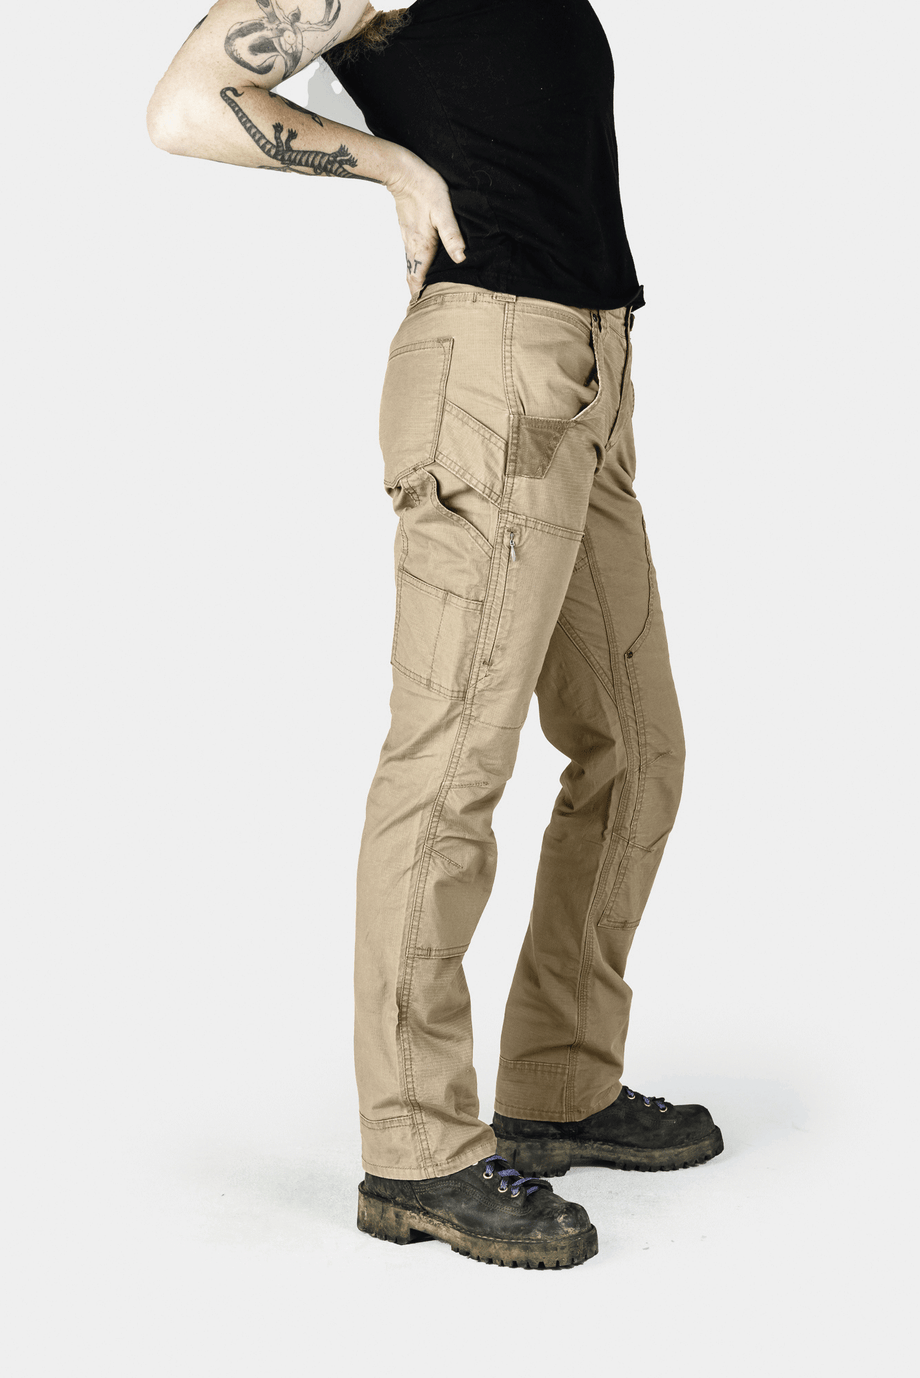  Dovetail Workwear Britt X Ultra Light Cargo Pants for Women,  Straight Leg Fit, 13 Functional Pockets, Flax Ripstop Size 0x30: Clothing,  Shoes & Jewelry